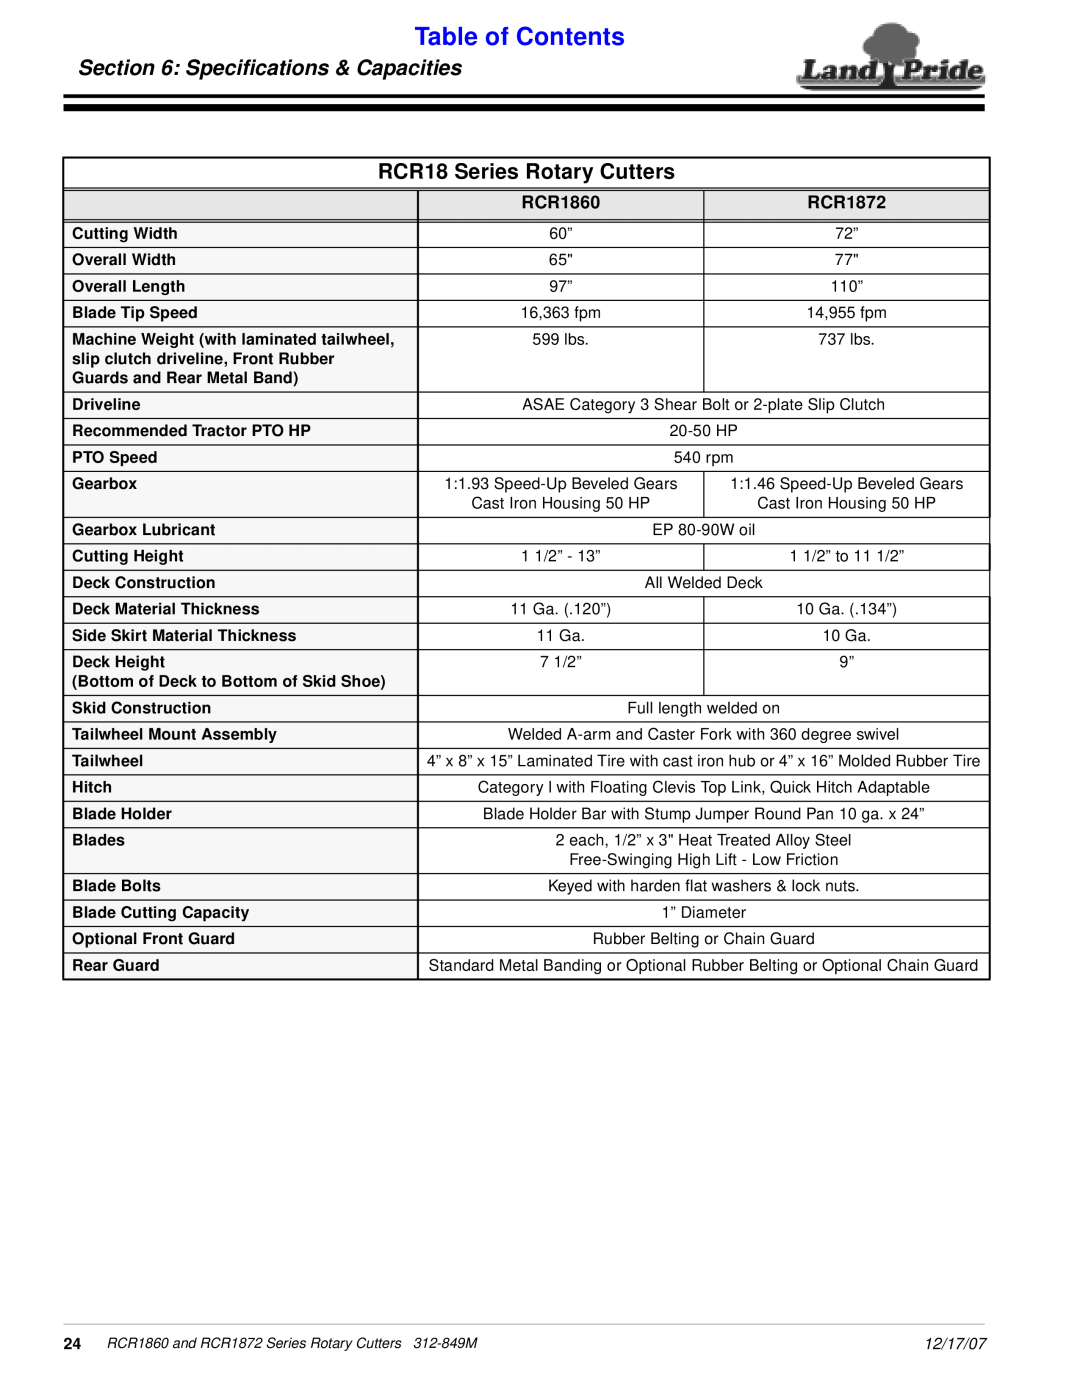 Land Pride RCR1860 manual Speciﬁcations & Capacities, RCR18 Series Rotary Cutters, RCR1872, Table of Contents, 12/17/07 